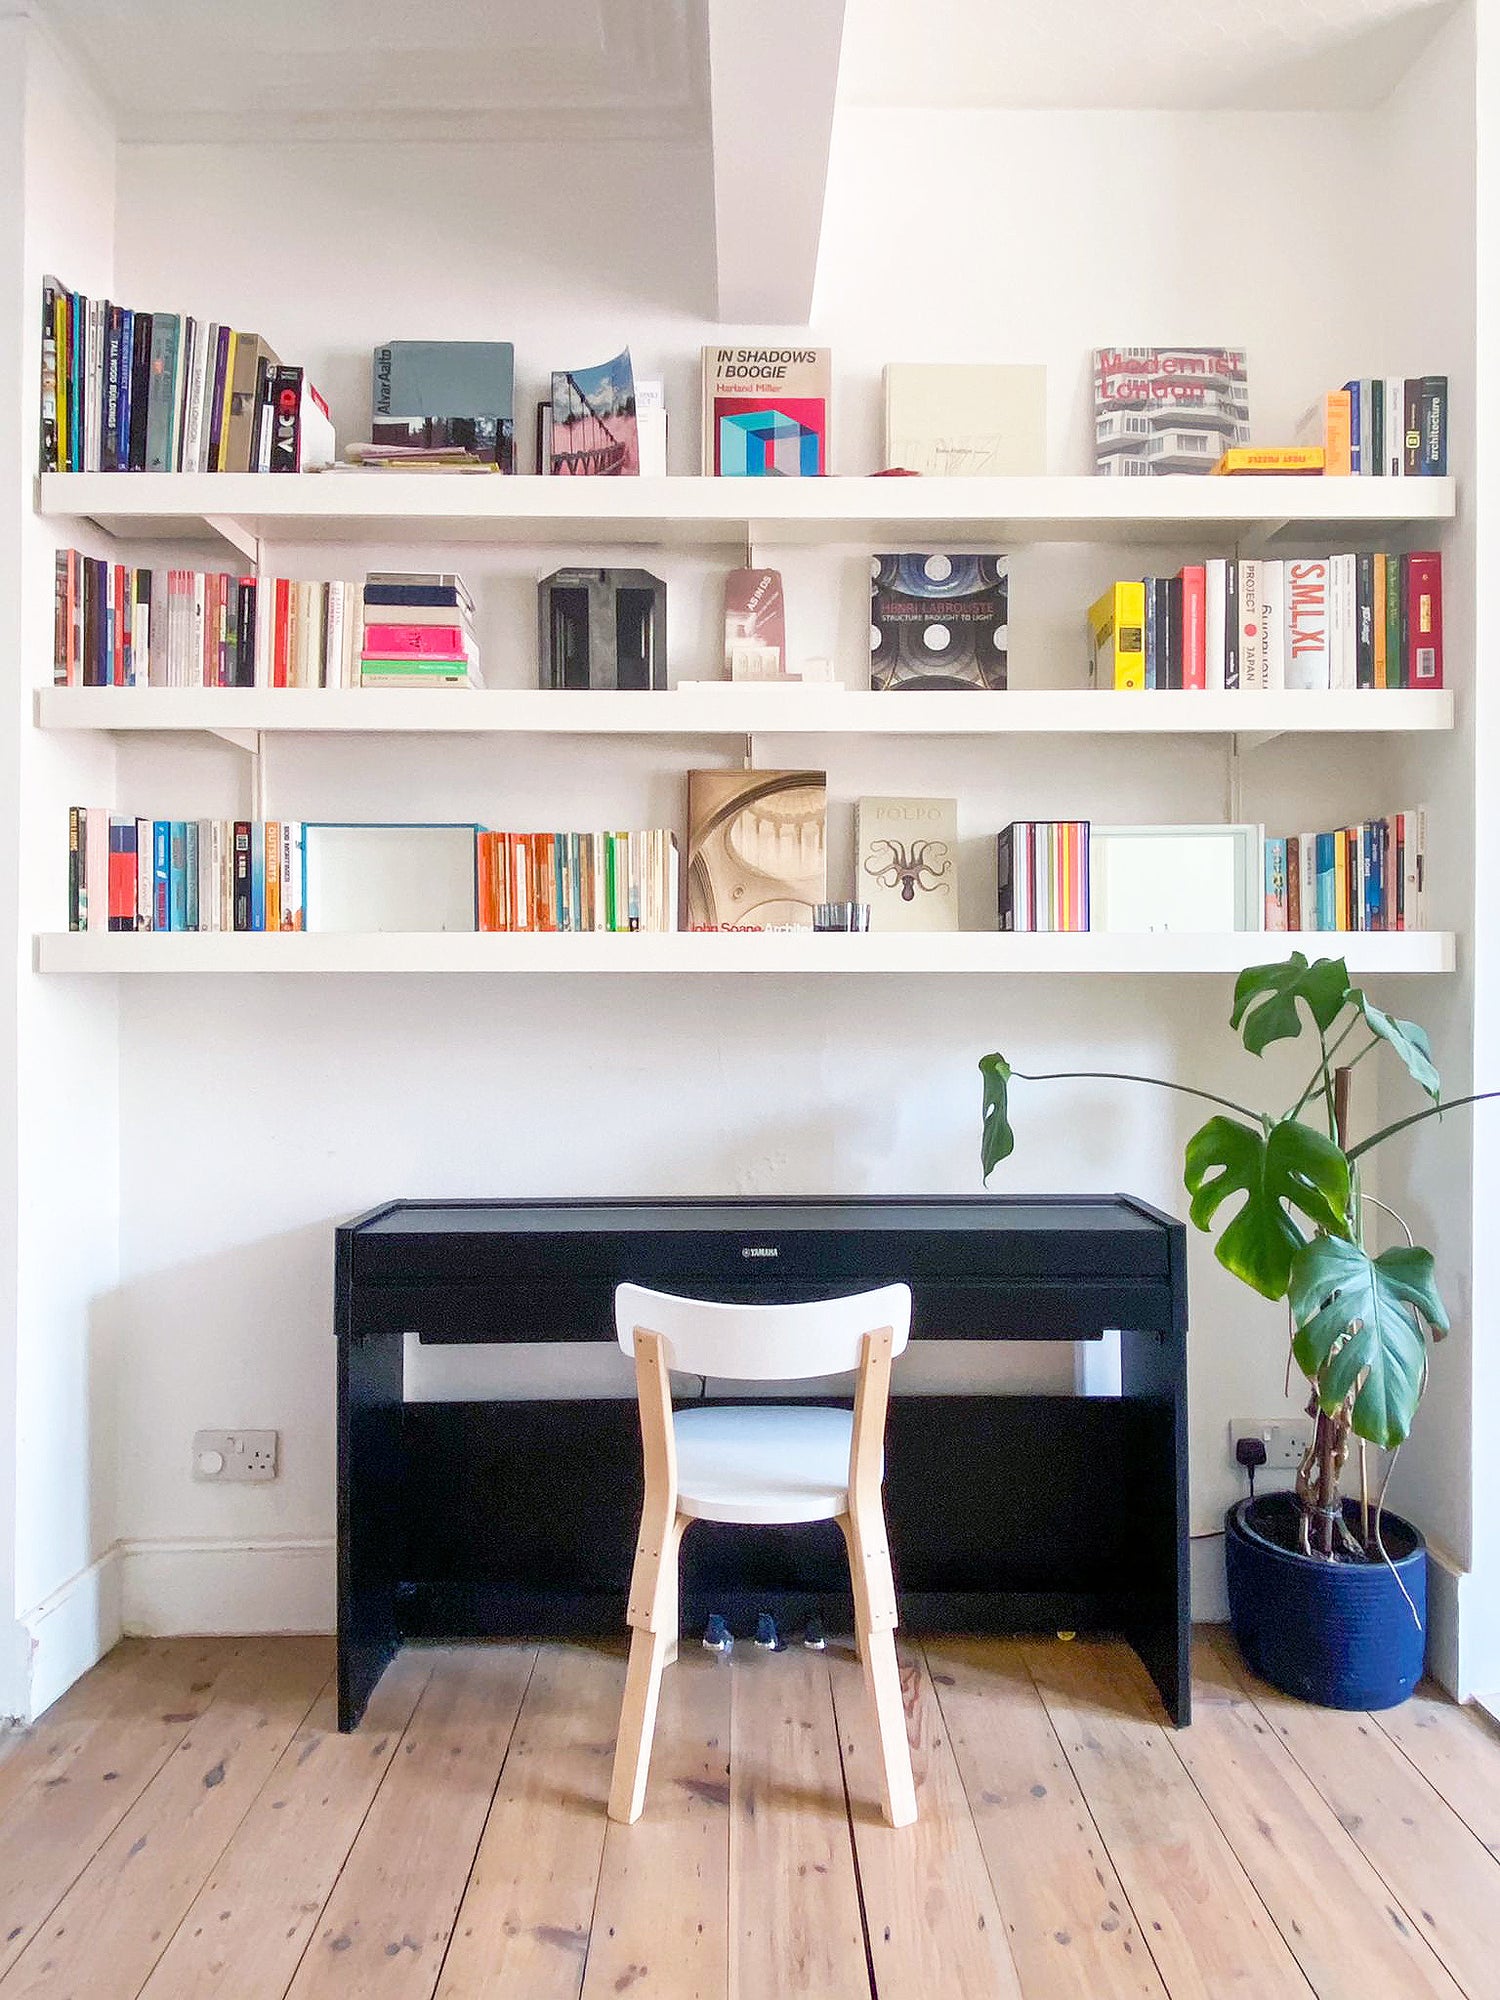 Long white wall shelves mounted above piano and chair